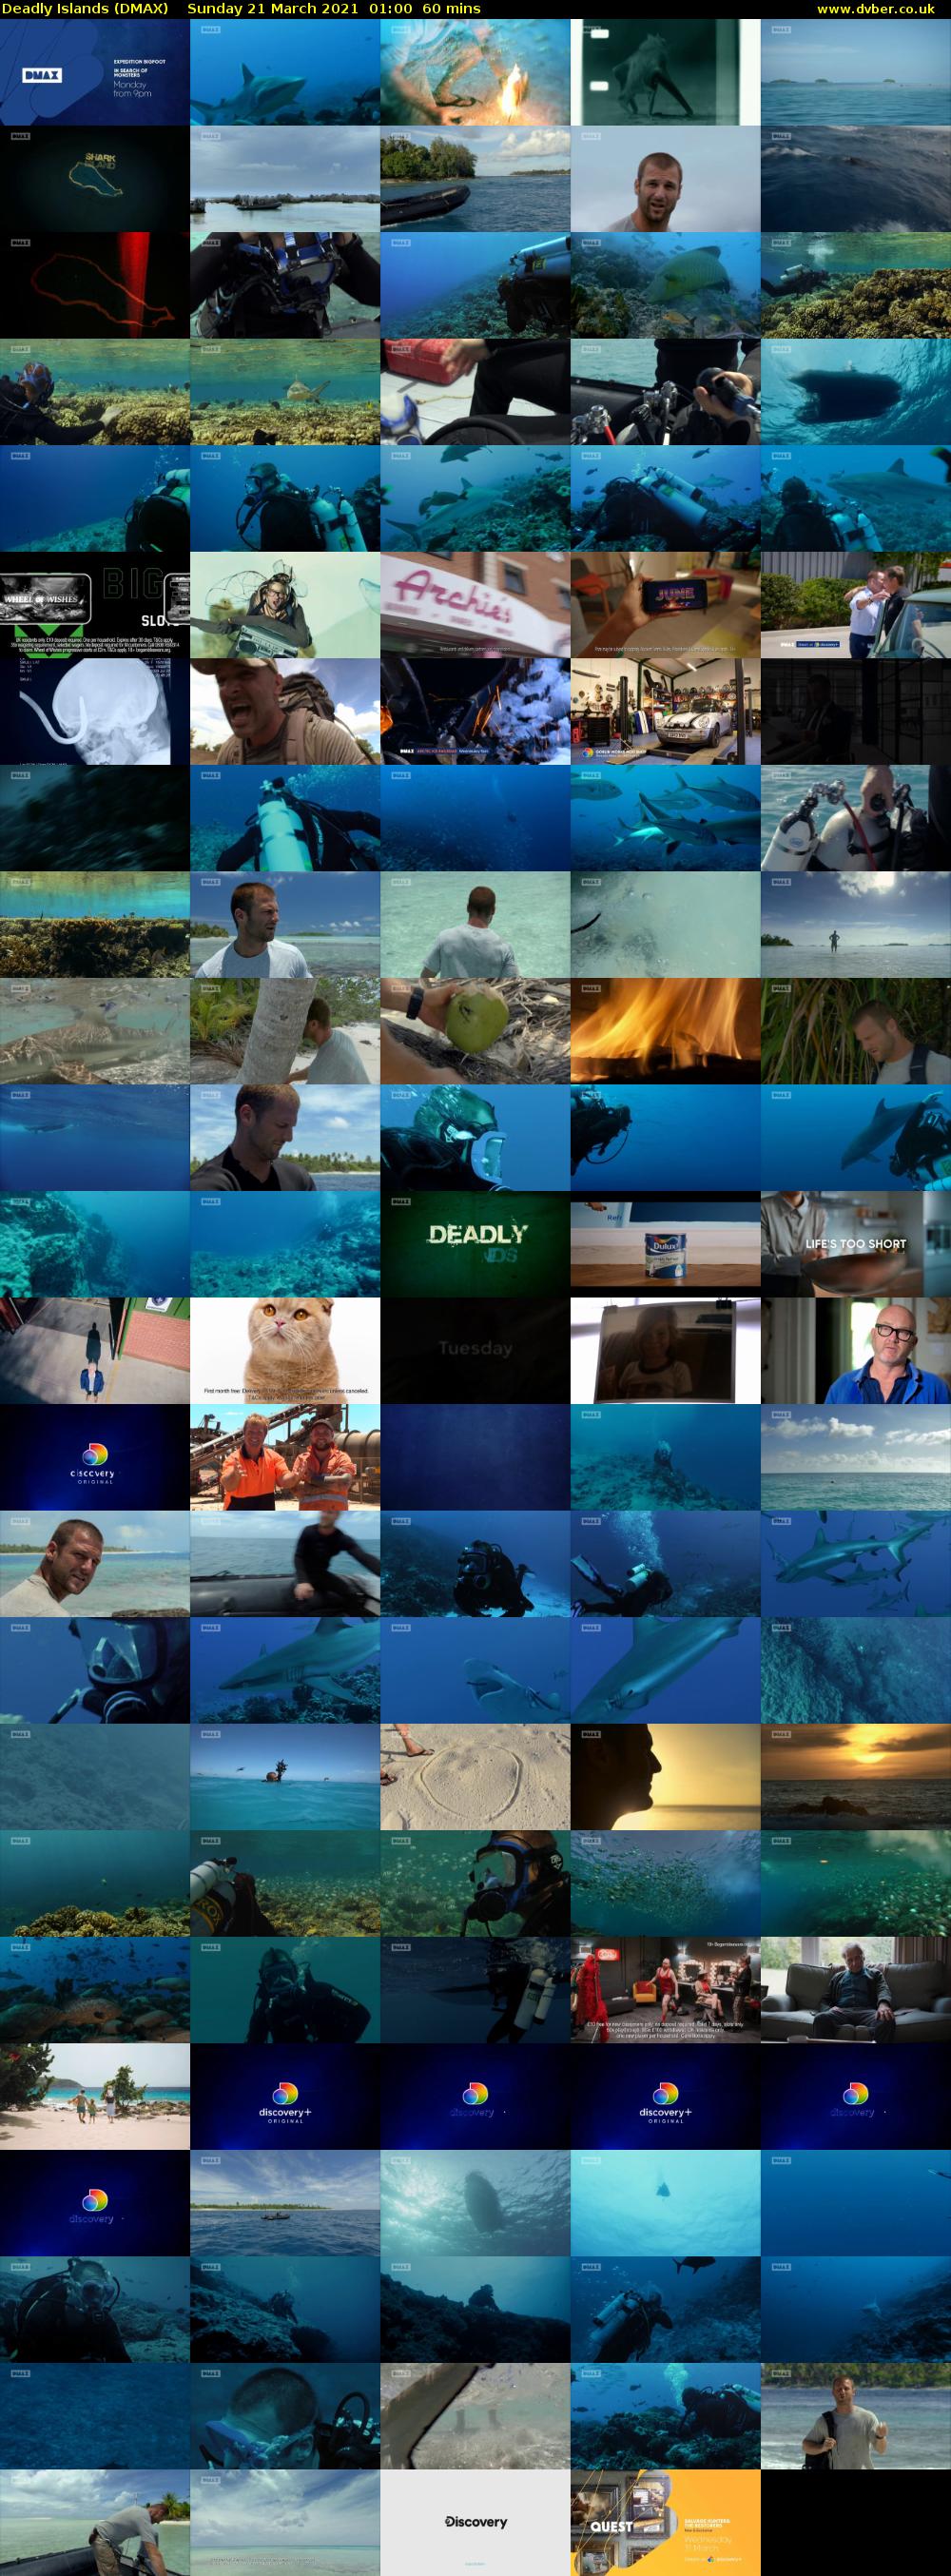 Deadly Islands (DMAX) Sunday 21 March 2021 01:00 - 02:00